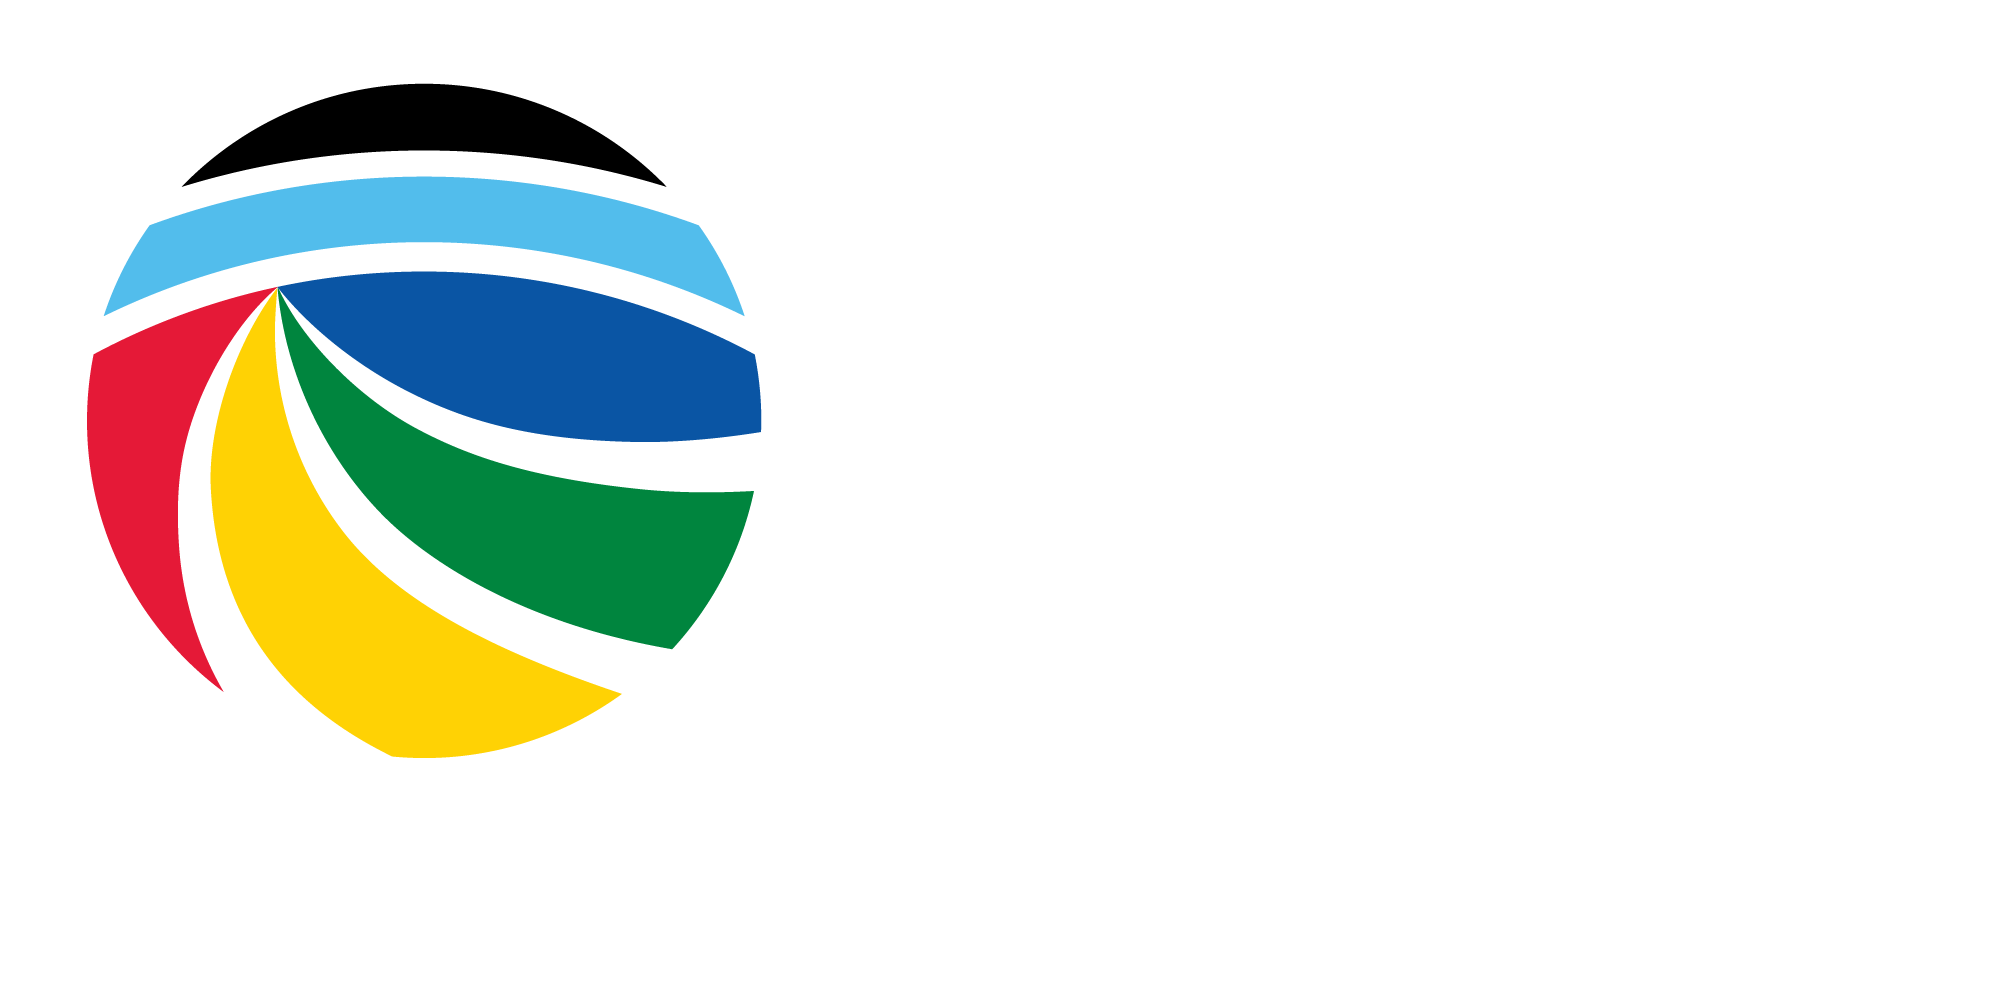 Earth Science Logo - Downloadable Images and Logos | Earth Science Week